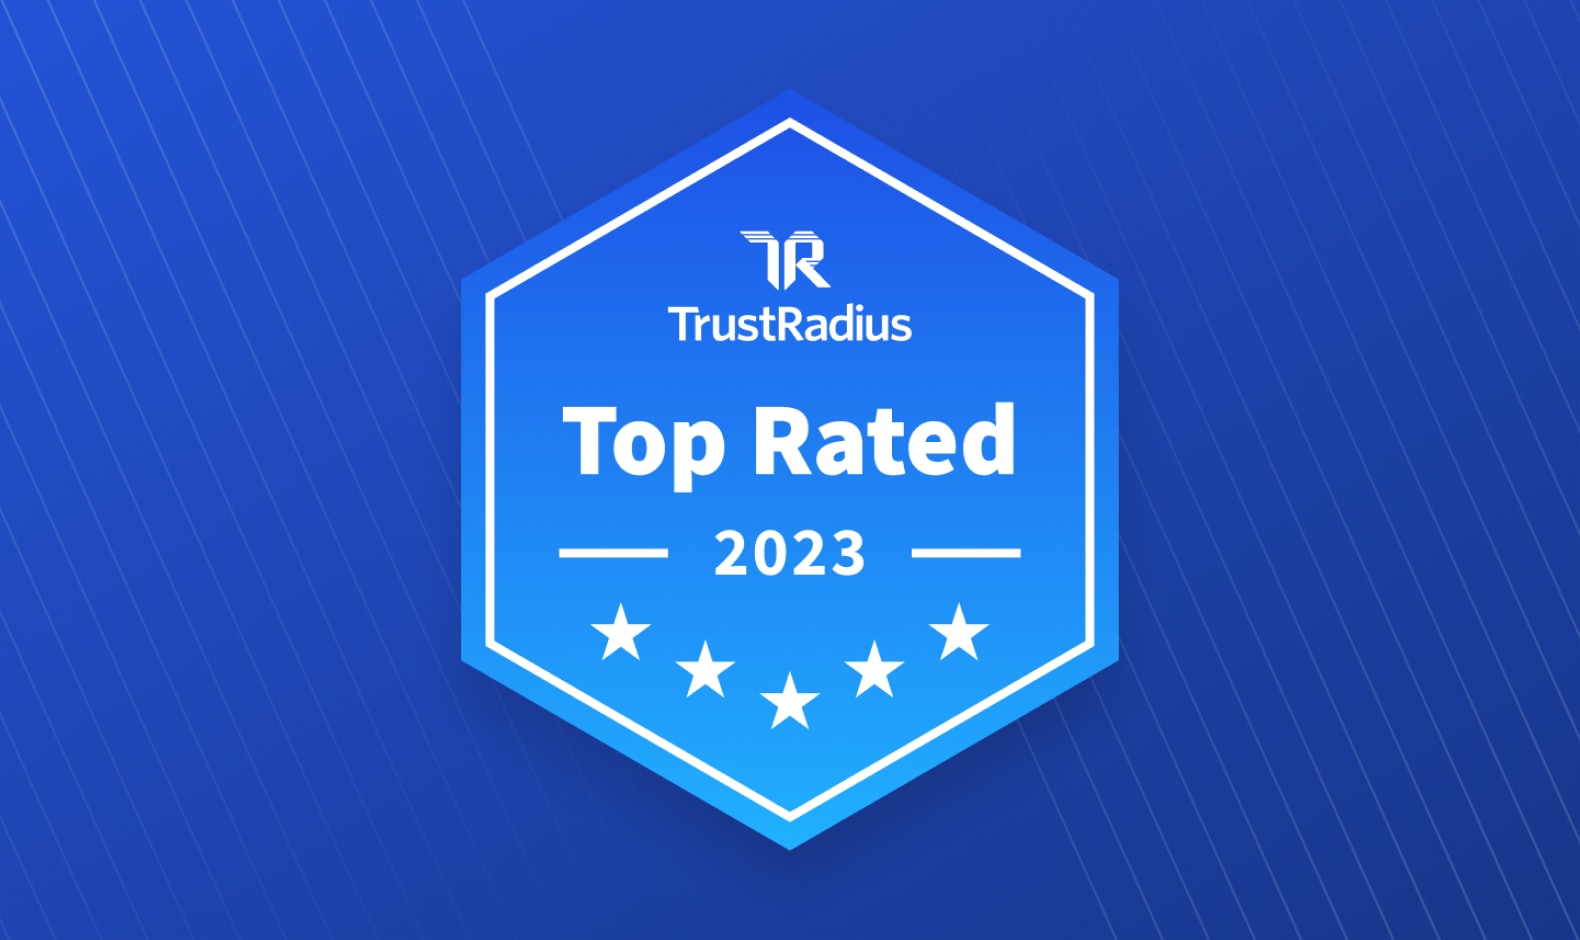 Top Rated service provider for Applicant Tracking Systems (ATS) and Recruitment Marketing on TrustRadius for 2023